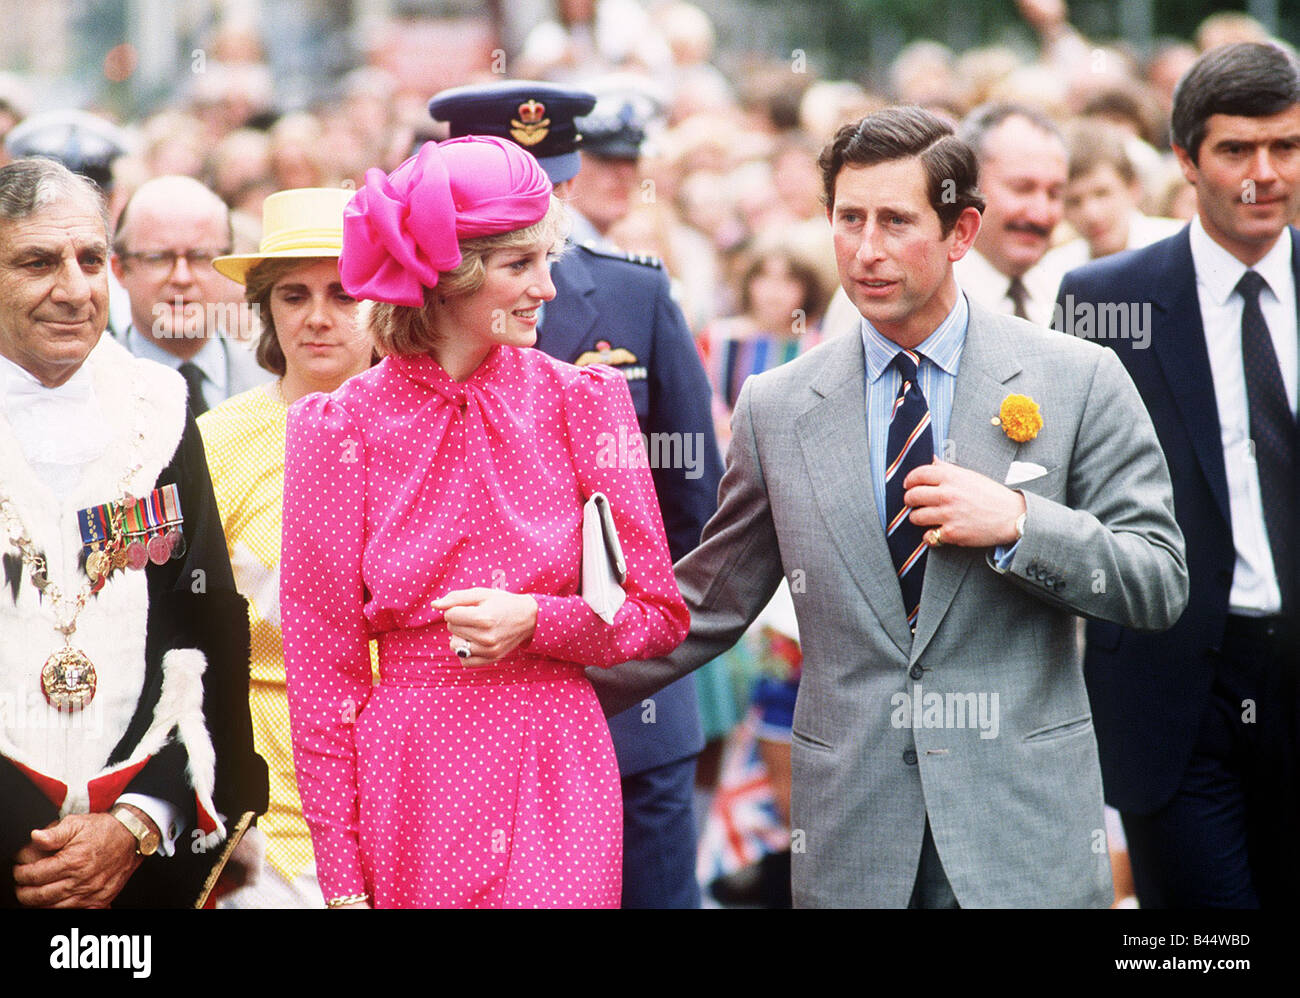 Prince and Princess of Wales at Guards Polo Club Windsor June 1983 Stock Photo